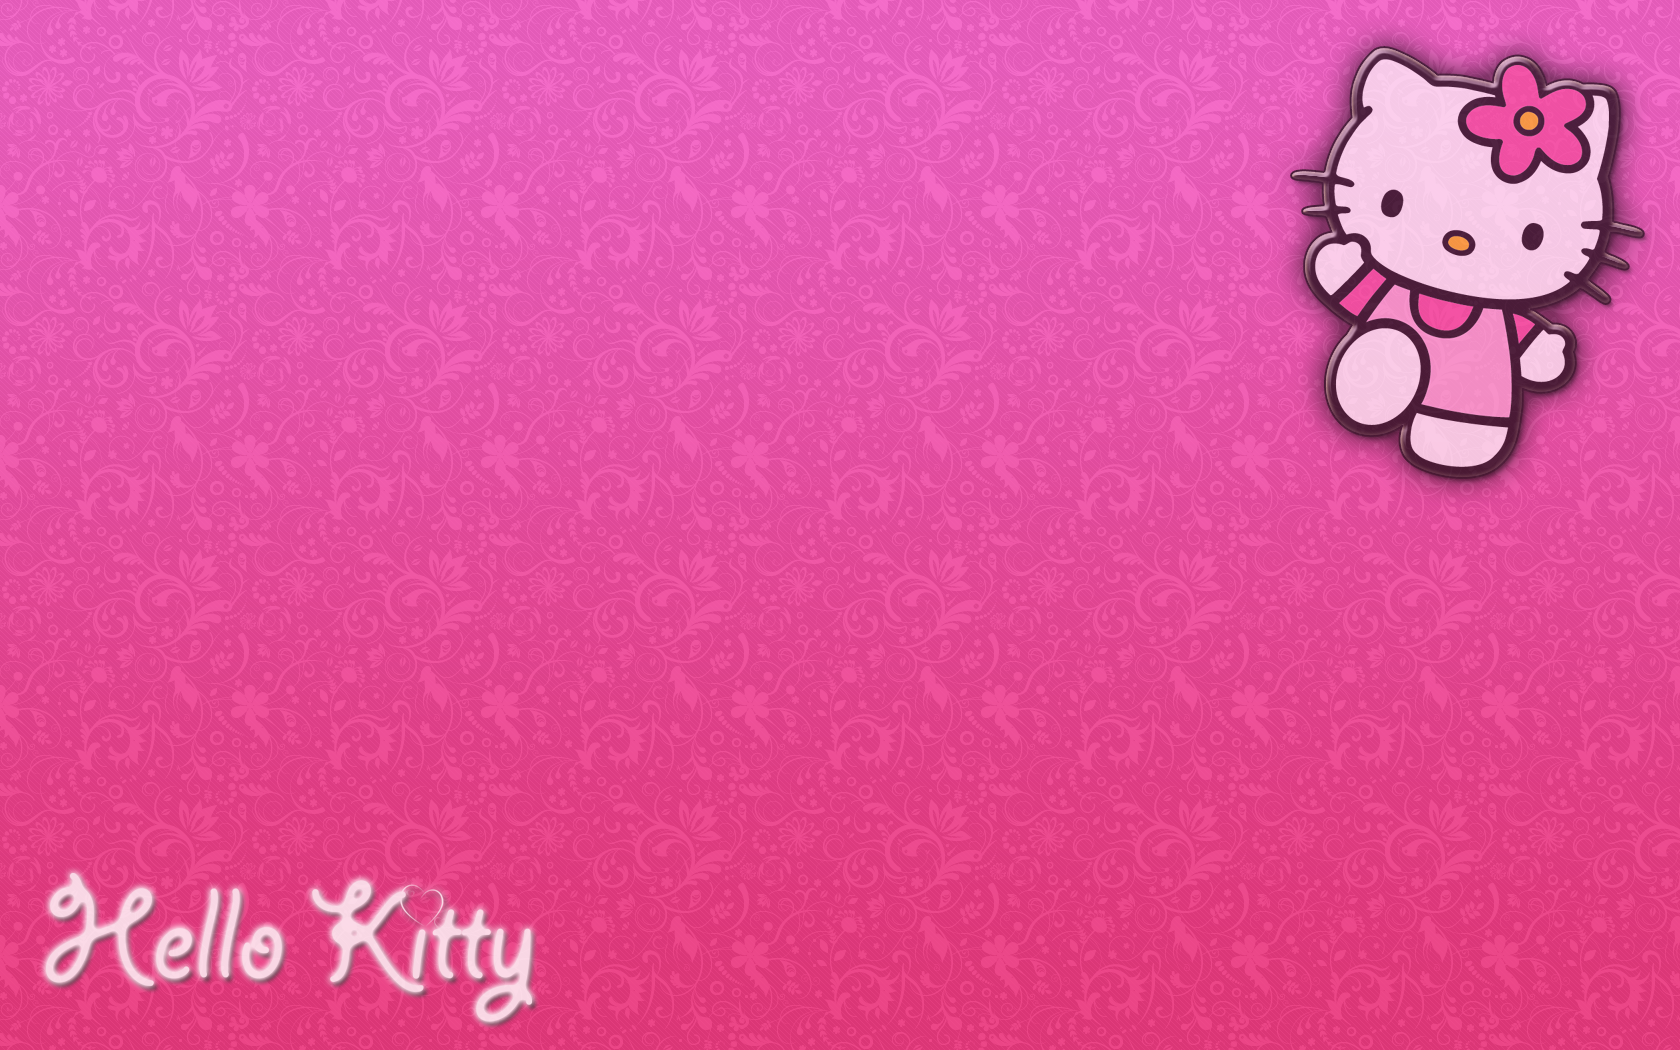 Hello Kitty Wallpaper Pink And Black Love Image